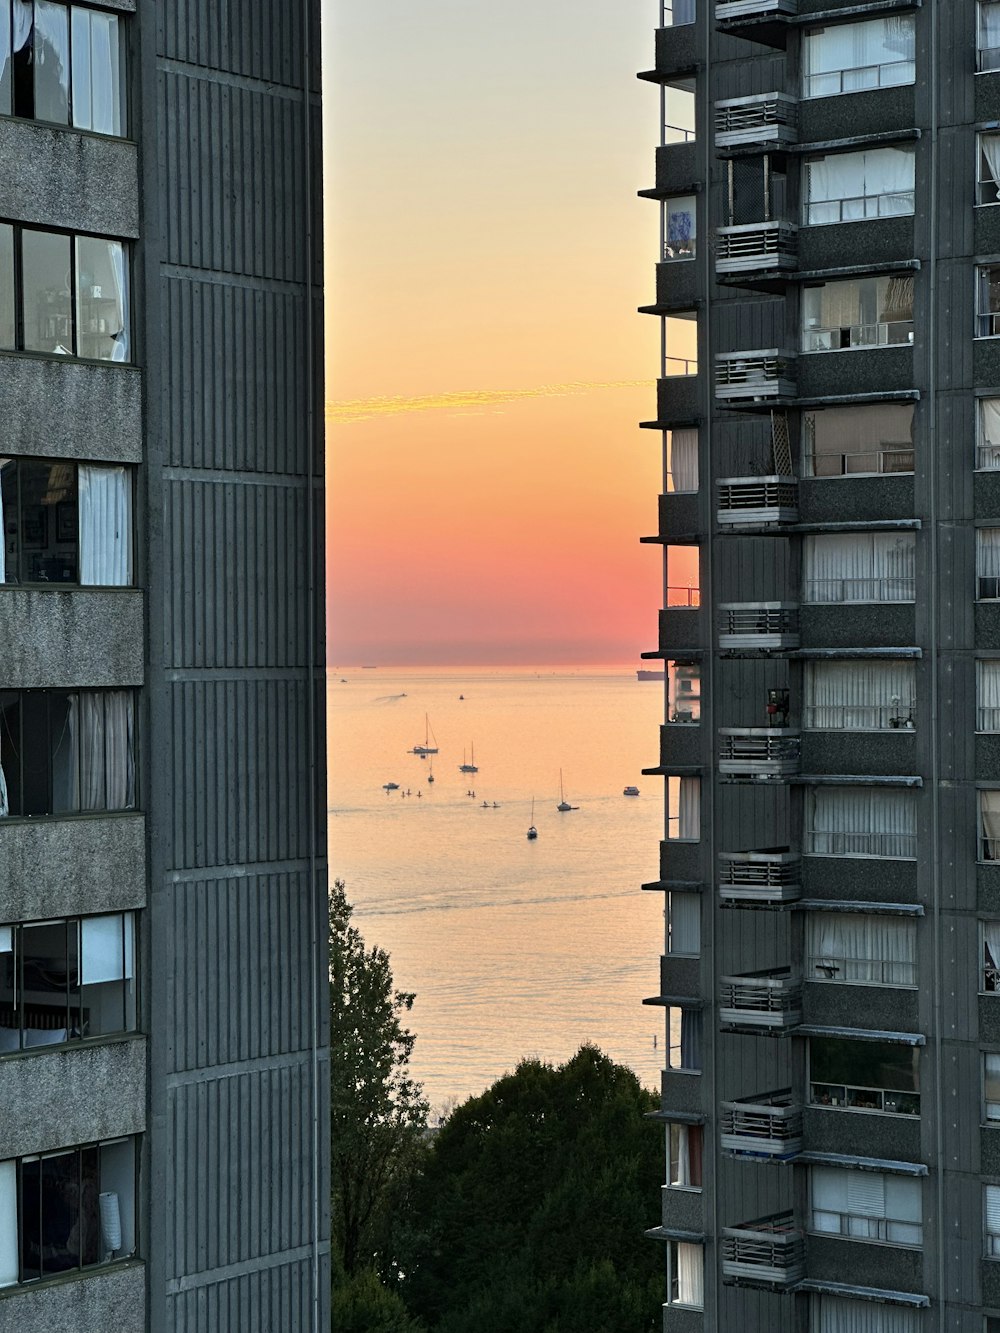 a view of a body of water from a high rise building